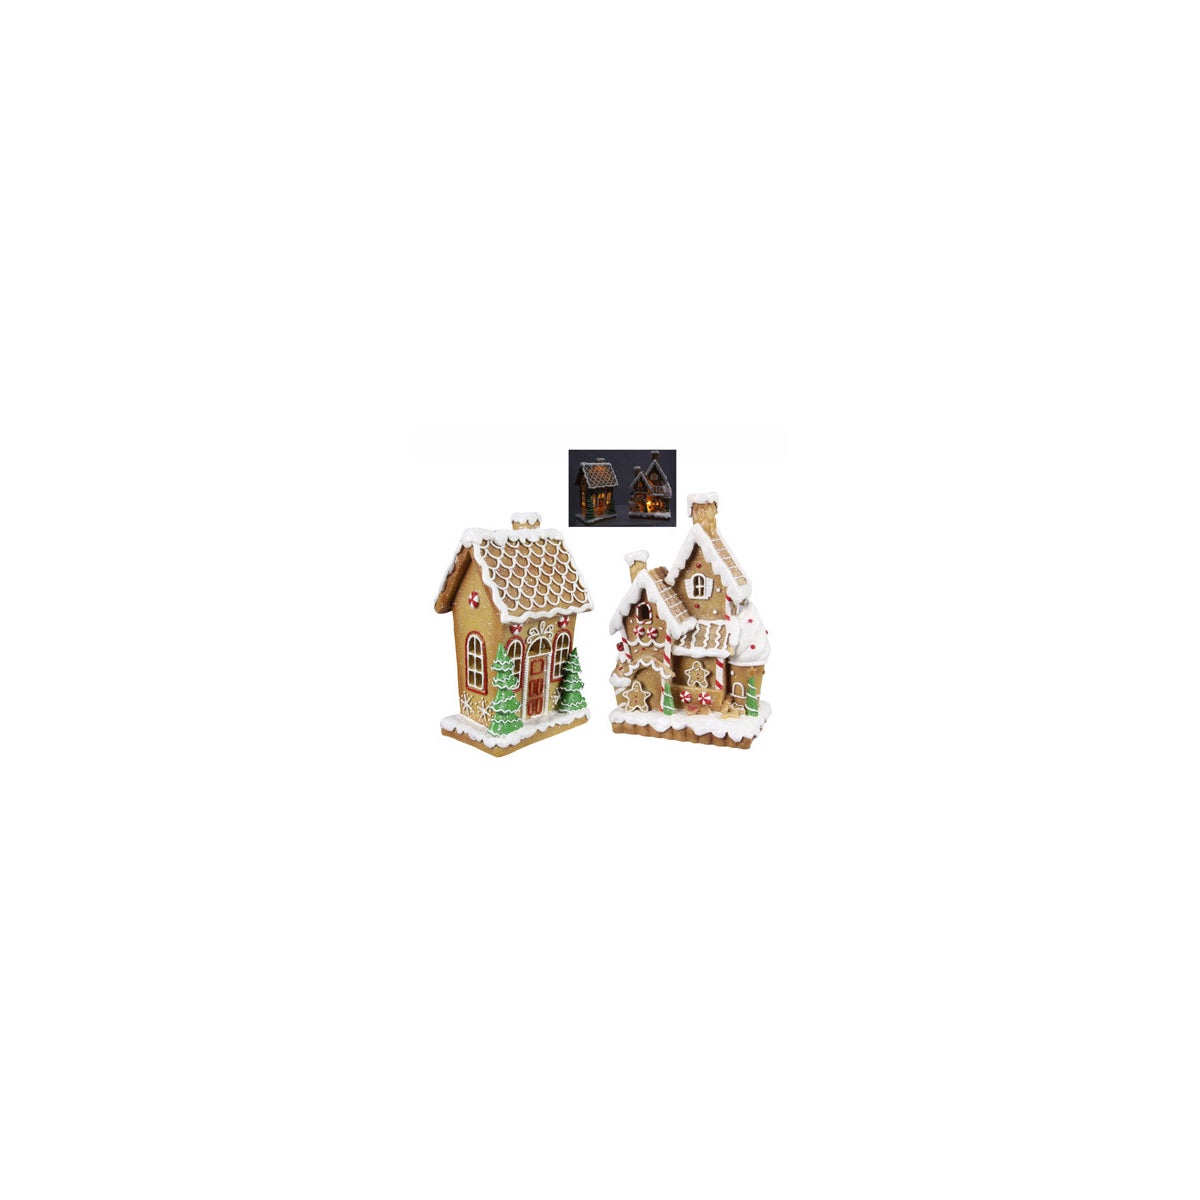 Resin Gingerbread House with LED Light, 2 assorted